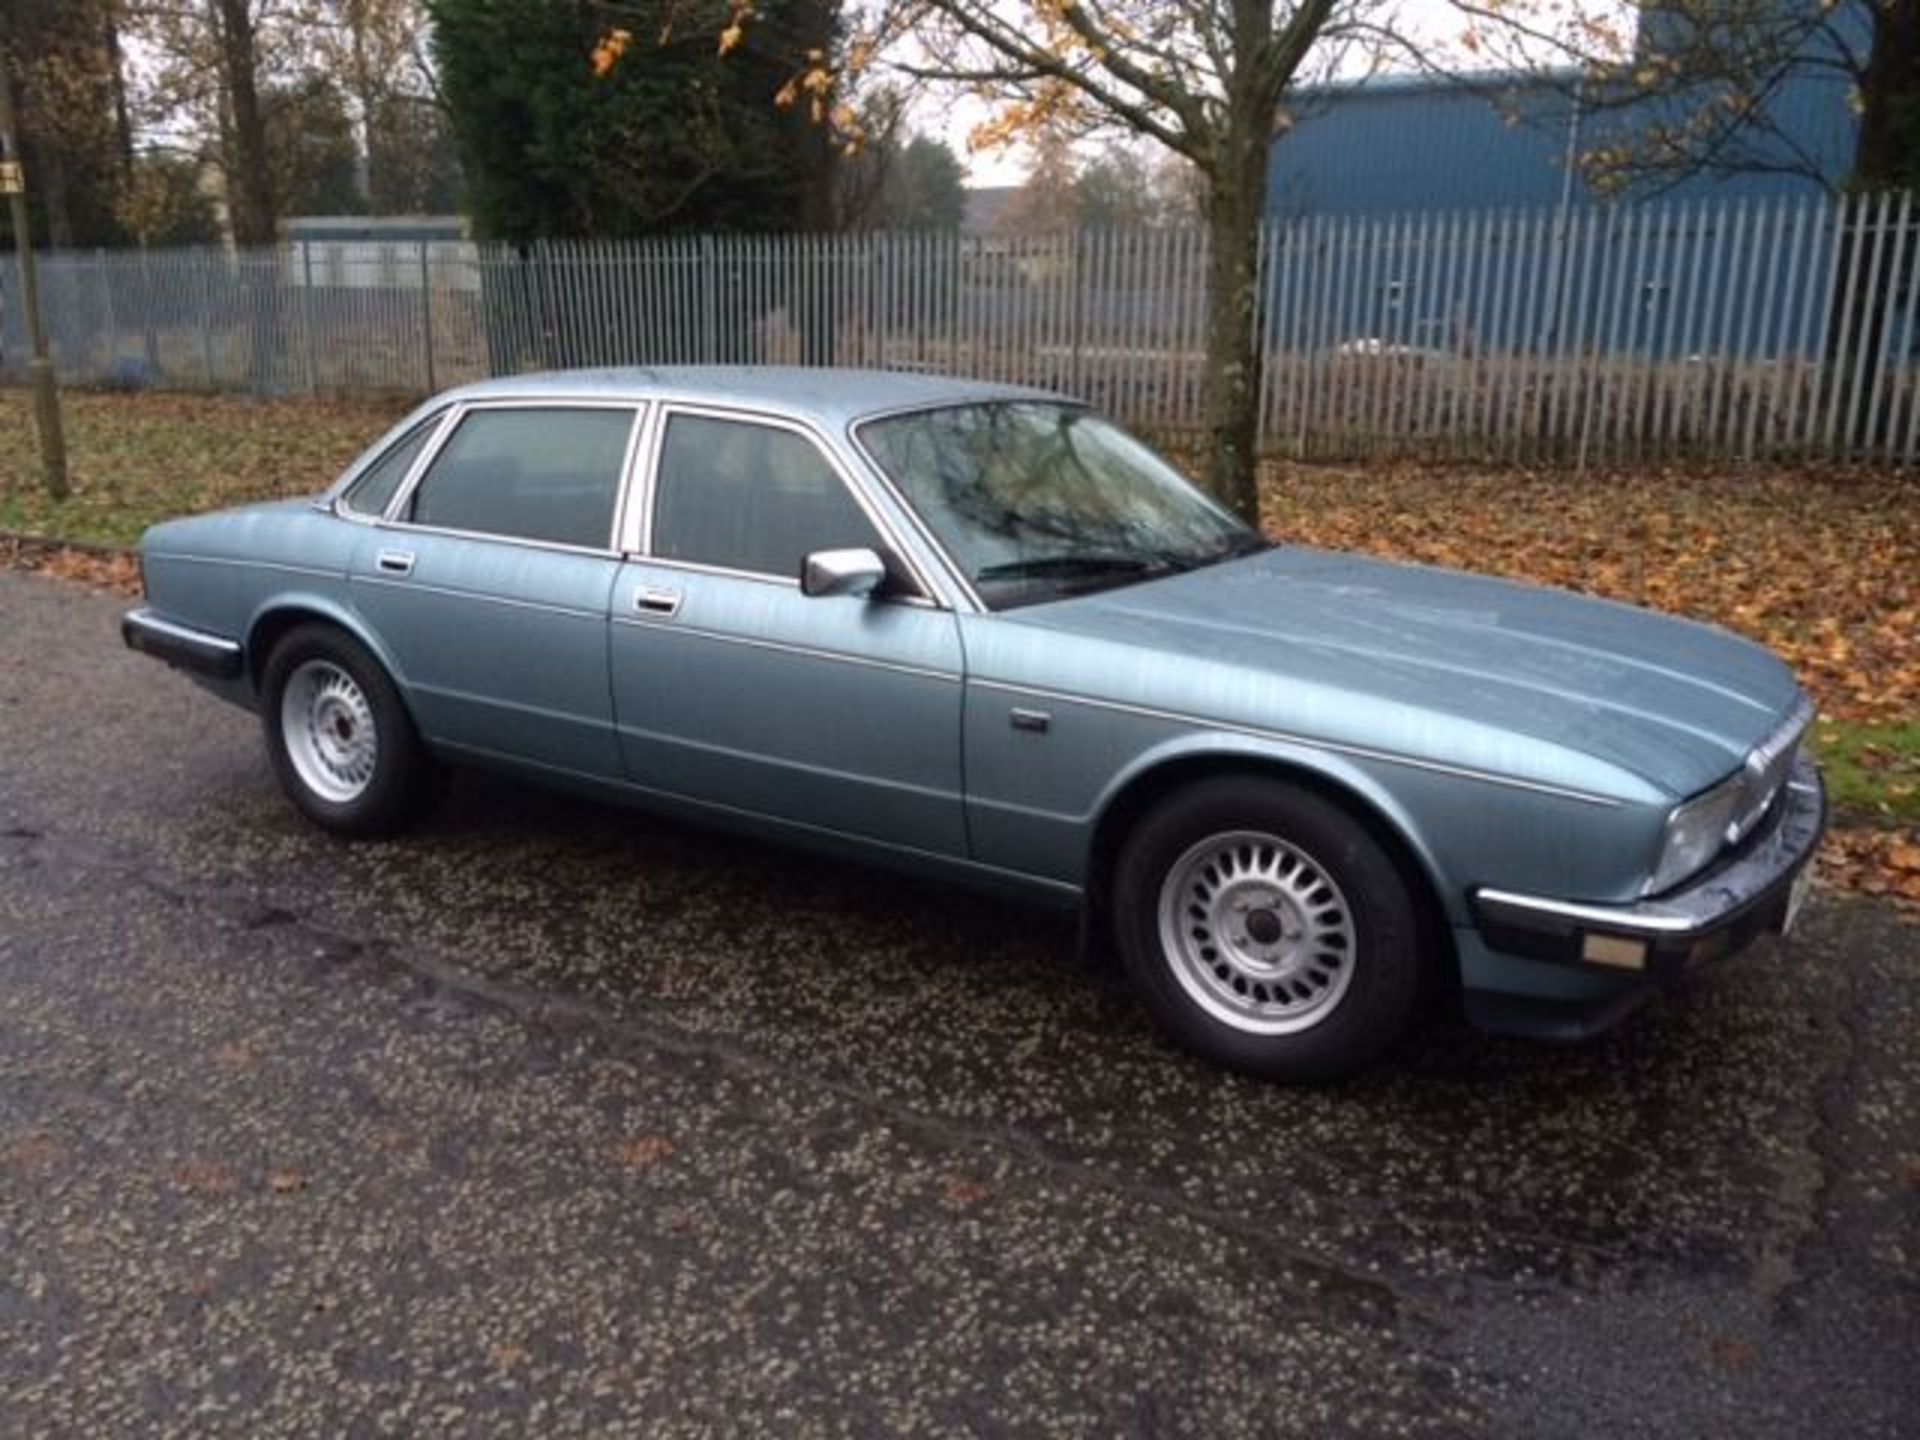 DAIMLER, 3.6 AUTO - 3590cc, Chassis number SAJDKALH3AA591593 - presented with an MOT test